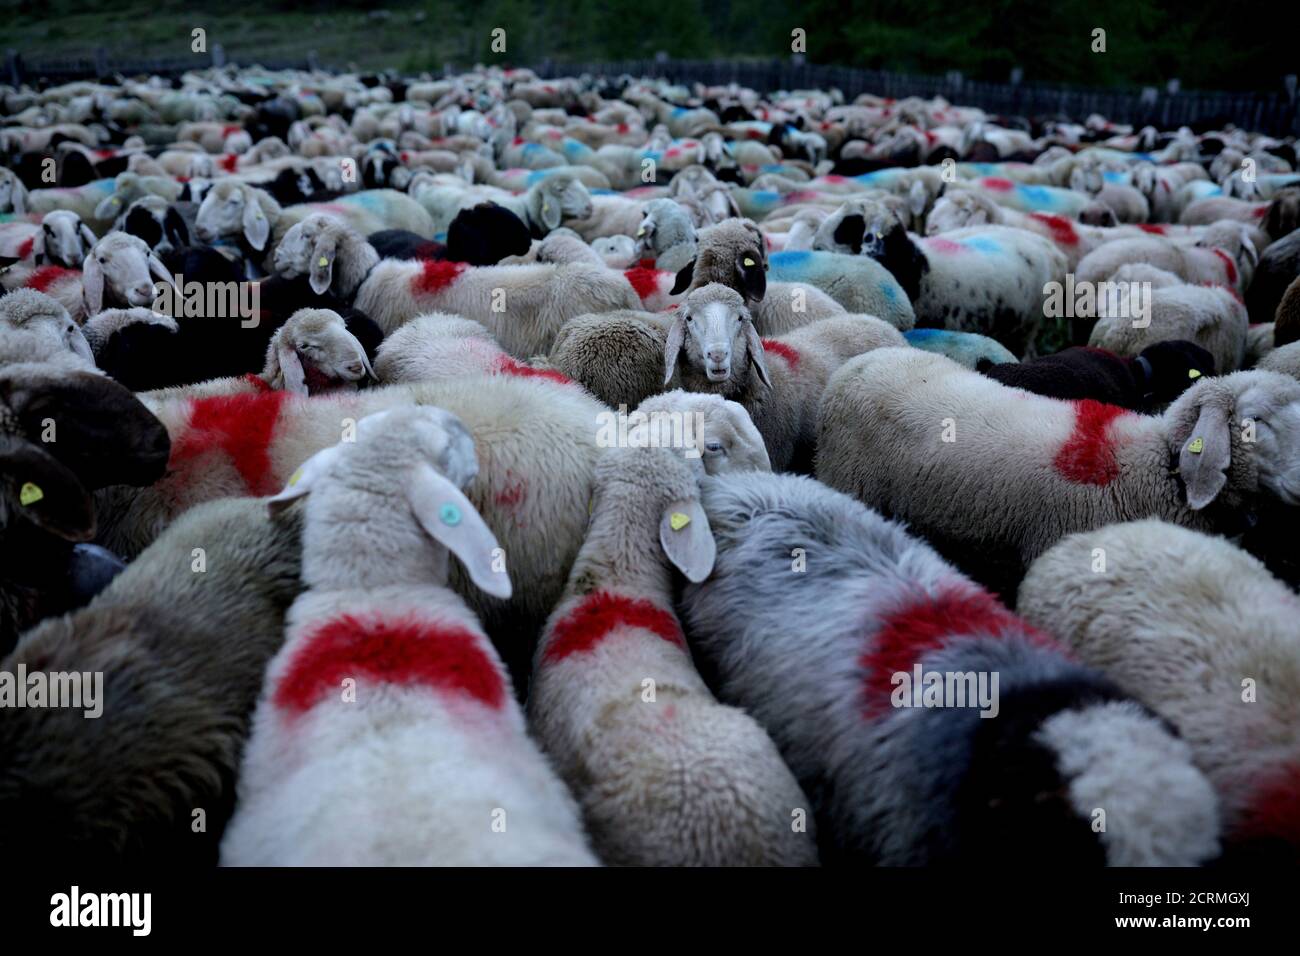 Sheep and lambs wait inside an enclosure during sunrise at 2,011 meters above sea level in the village of Kurzras (Maso Corto) in the autonomous region of South Tyrol, Italy, June 9, 2018. Picture taken June 9, 2018. REUTERS/Lisi Niesner Stock Photo